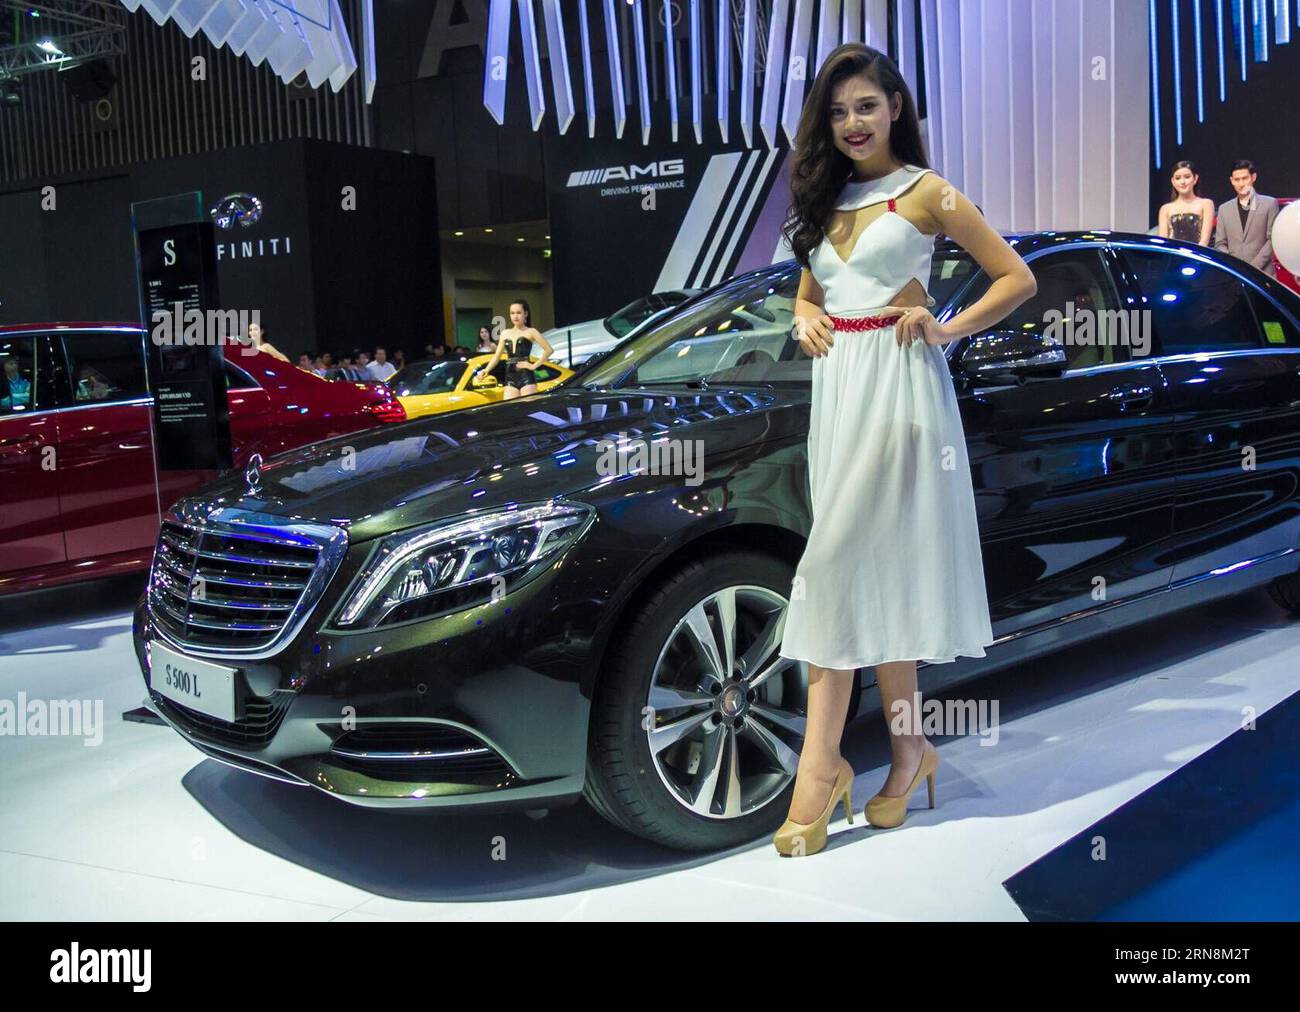 HO CHI MINH CITY, Oct. 28, 2015 -- A model presents a Mercedes-Benz S500 L during the Vietnam Motor Show 2015 at Saigon Exhibition and Convention Centre in Ho Chi Minh city, Vietnam, Oct. 28, 2015. Vietnam Motor Show 2015, the biggest annual event of the Vietnamese auto industry, opens from Oct. 28 to Nov. 1. ) VIETNAM-HO CHI MINH CITY-VIETNAM MOTOR SHOW 2015 NguyenxLexHuyen PUBLICATIONxNOTxINxCHN   Ho Chi Minh City OCT 28 2015 a Model Presents a Mercedes Benz S500 l during The Vietnam Engine Show 2015 AT Saigon Exhibition and Convention Centre in Ho Chi Minh City Vietnam OCT 28 2015 Vietnam E Stock Photo